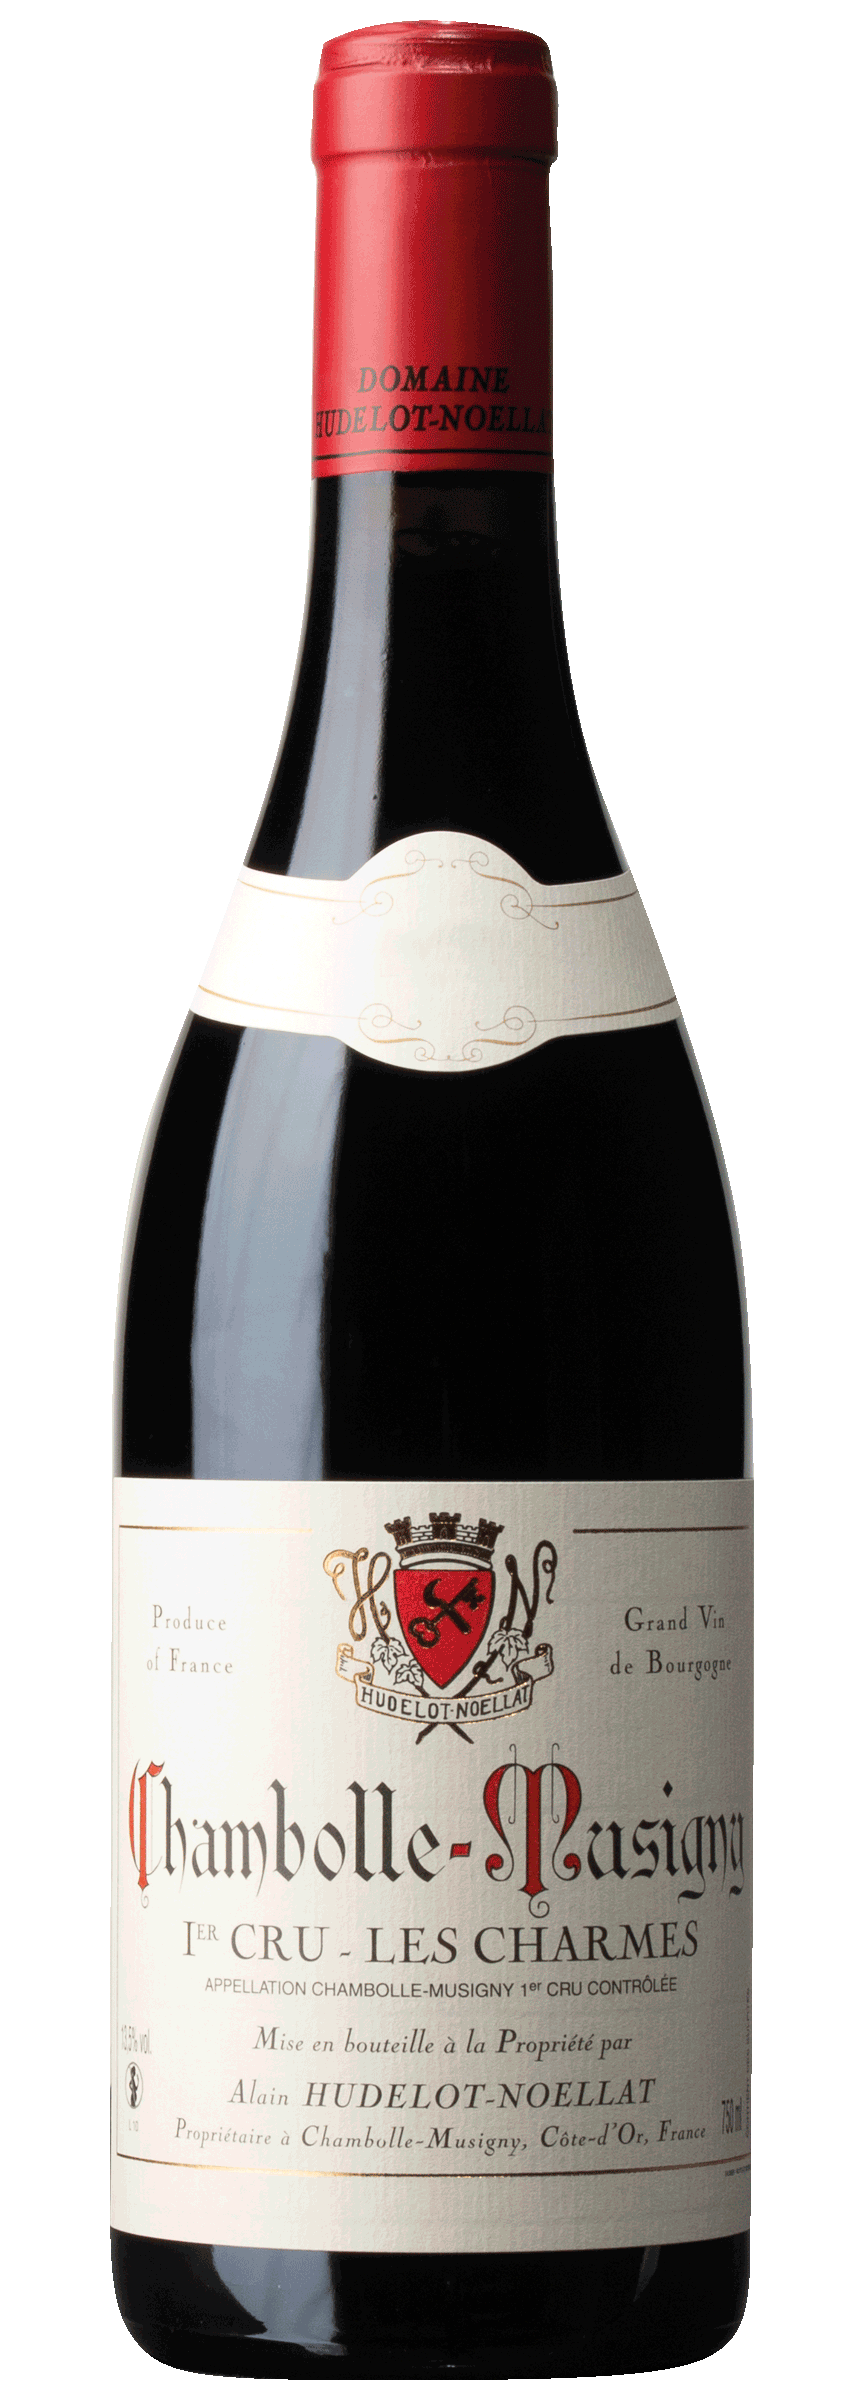 Chambolle-Musigny 1er Cru Les Charmes, rouge